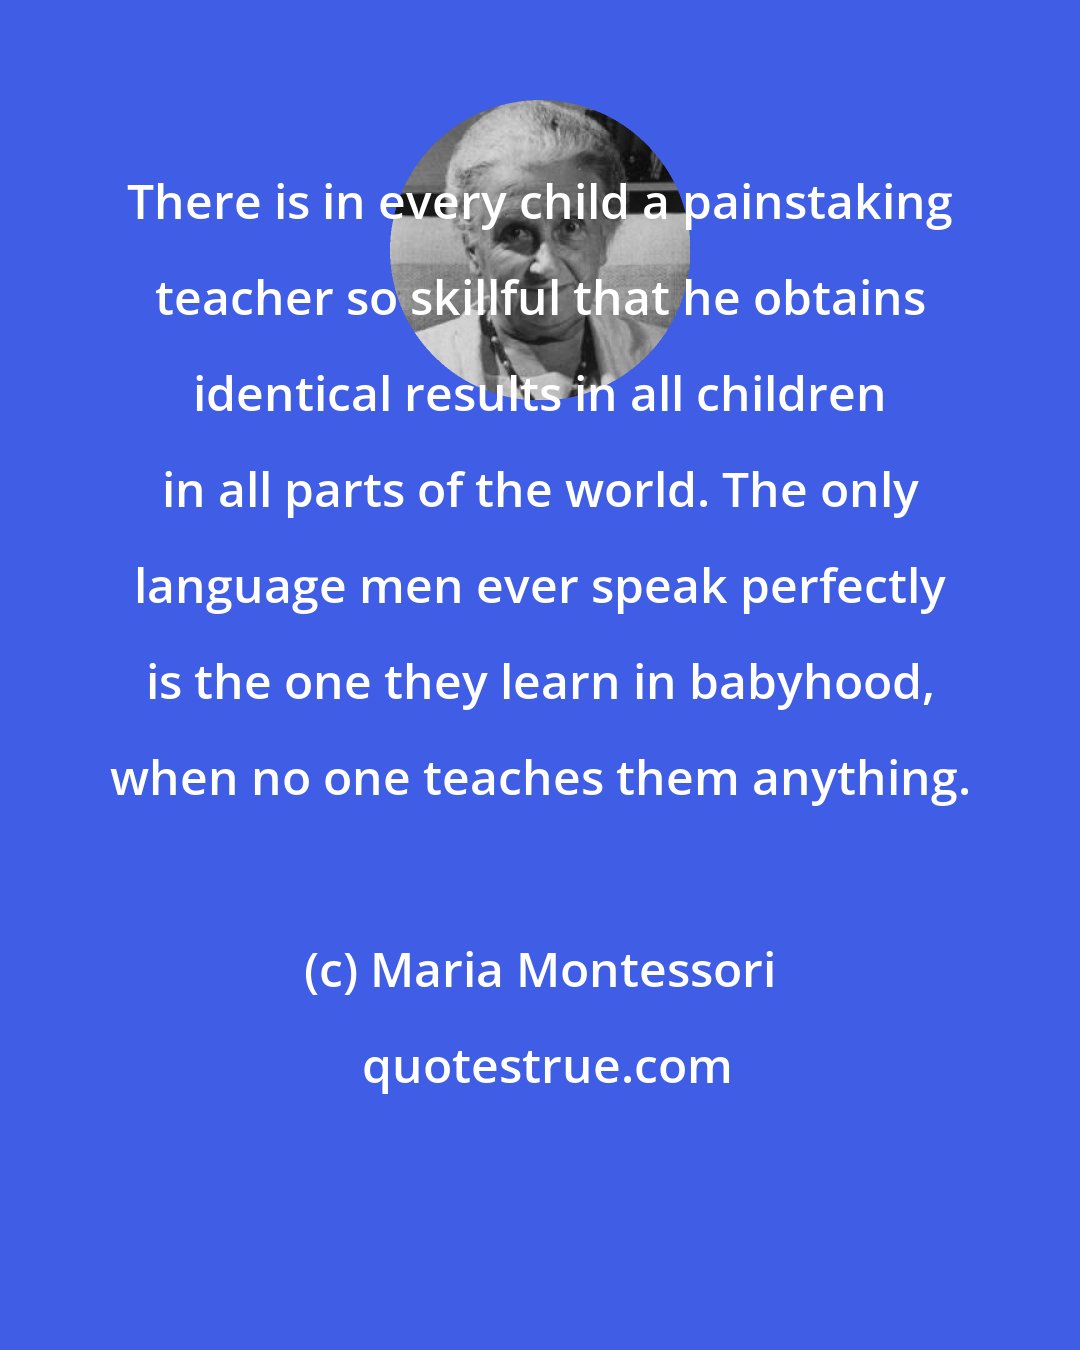 Maria Montessori: There is in every child a painstaking teacher so skillful that he obtains identical results in all children in all parts of the world. The only language men ever speak perfectly is the one they learn in babyhood, when no one teaches them anything.